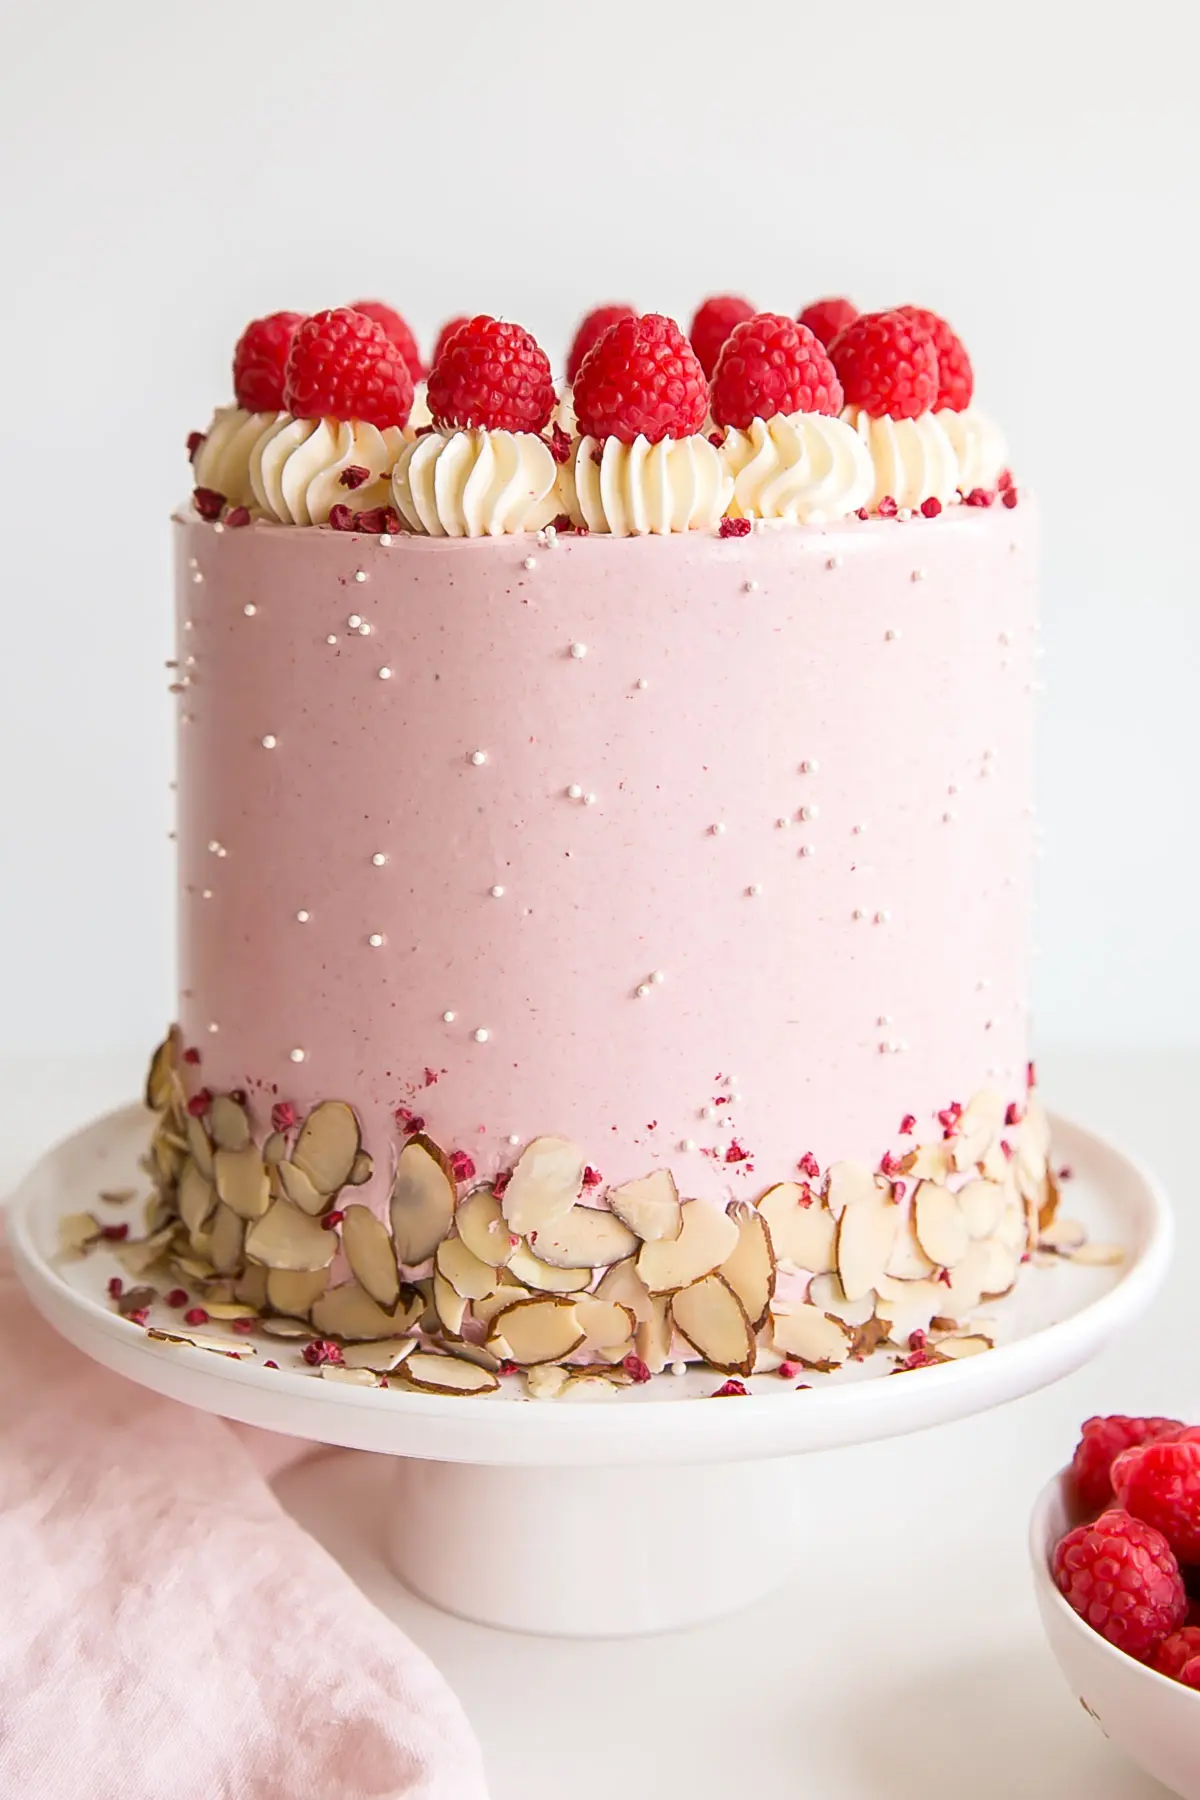 Raspberry-Lime Secret Tunnel Cake - My Food and Family